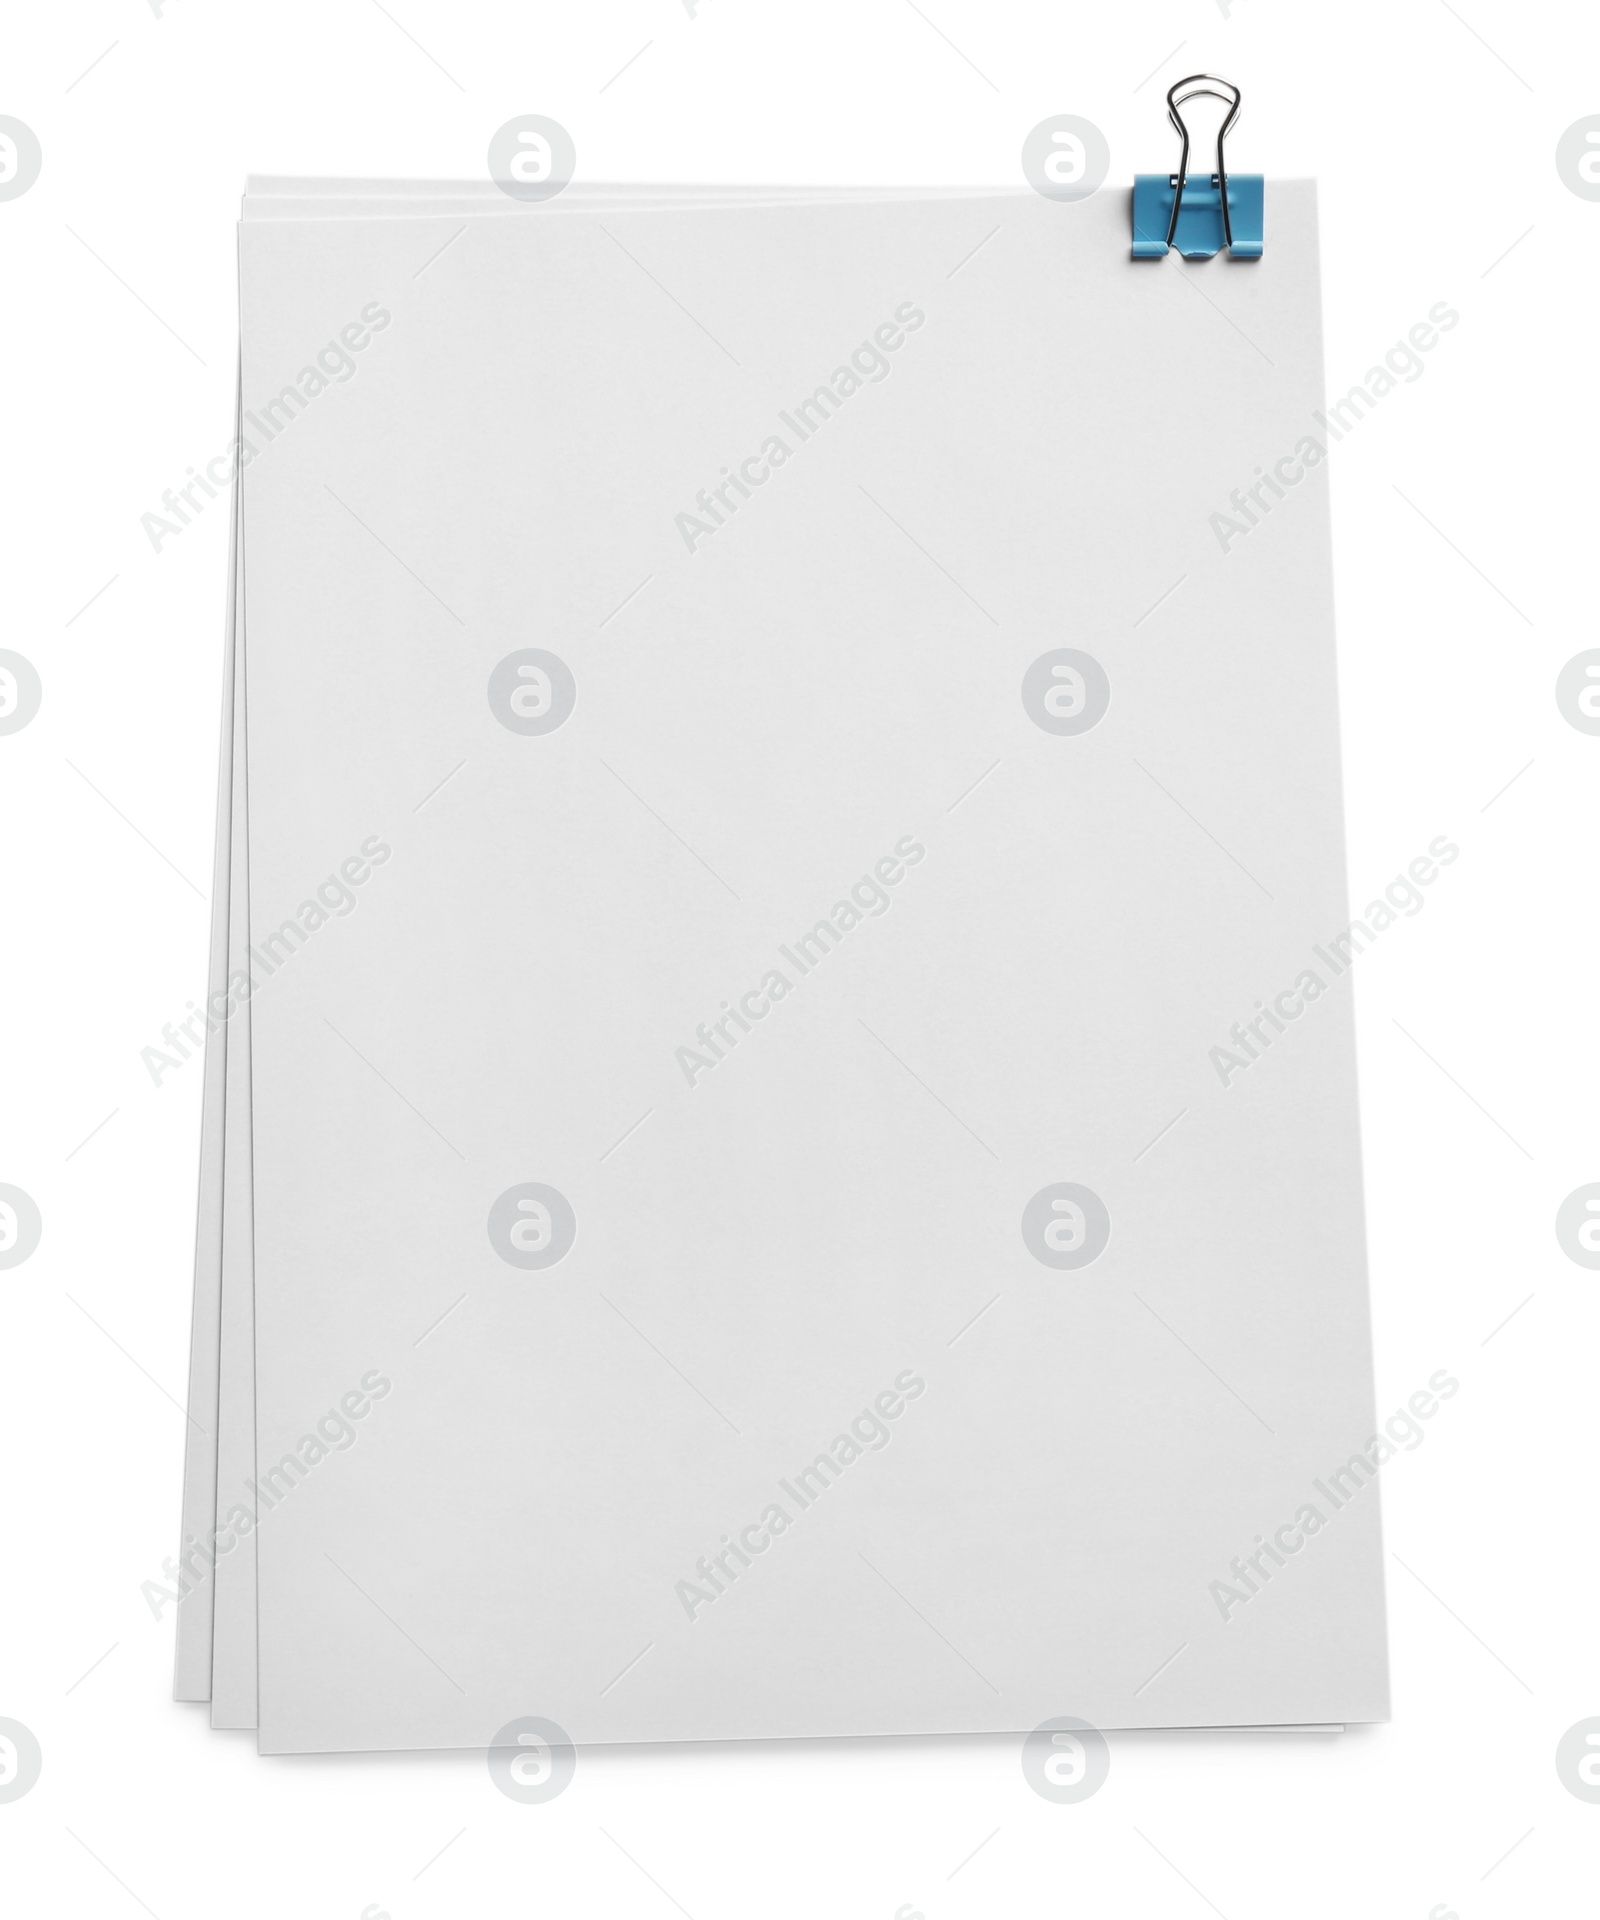 Photo of Blank sheets of paper with binder clip on white background, top view